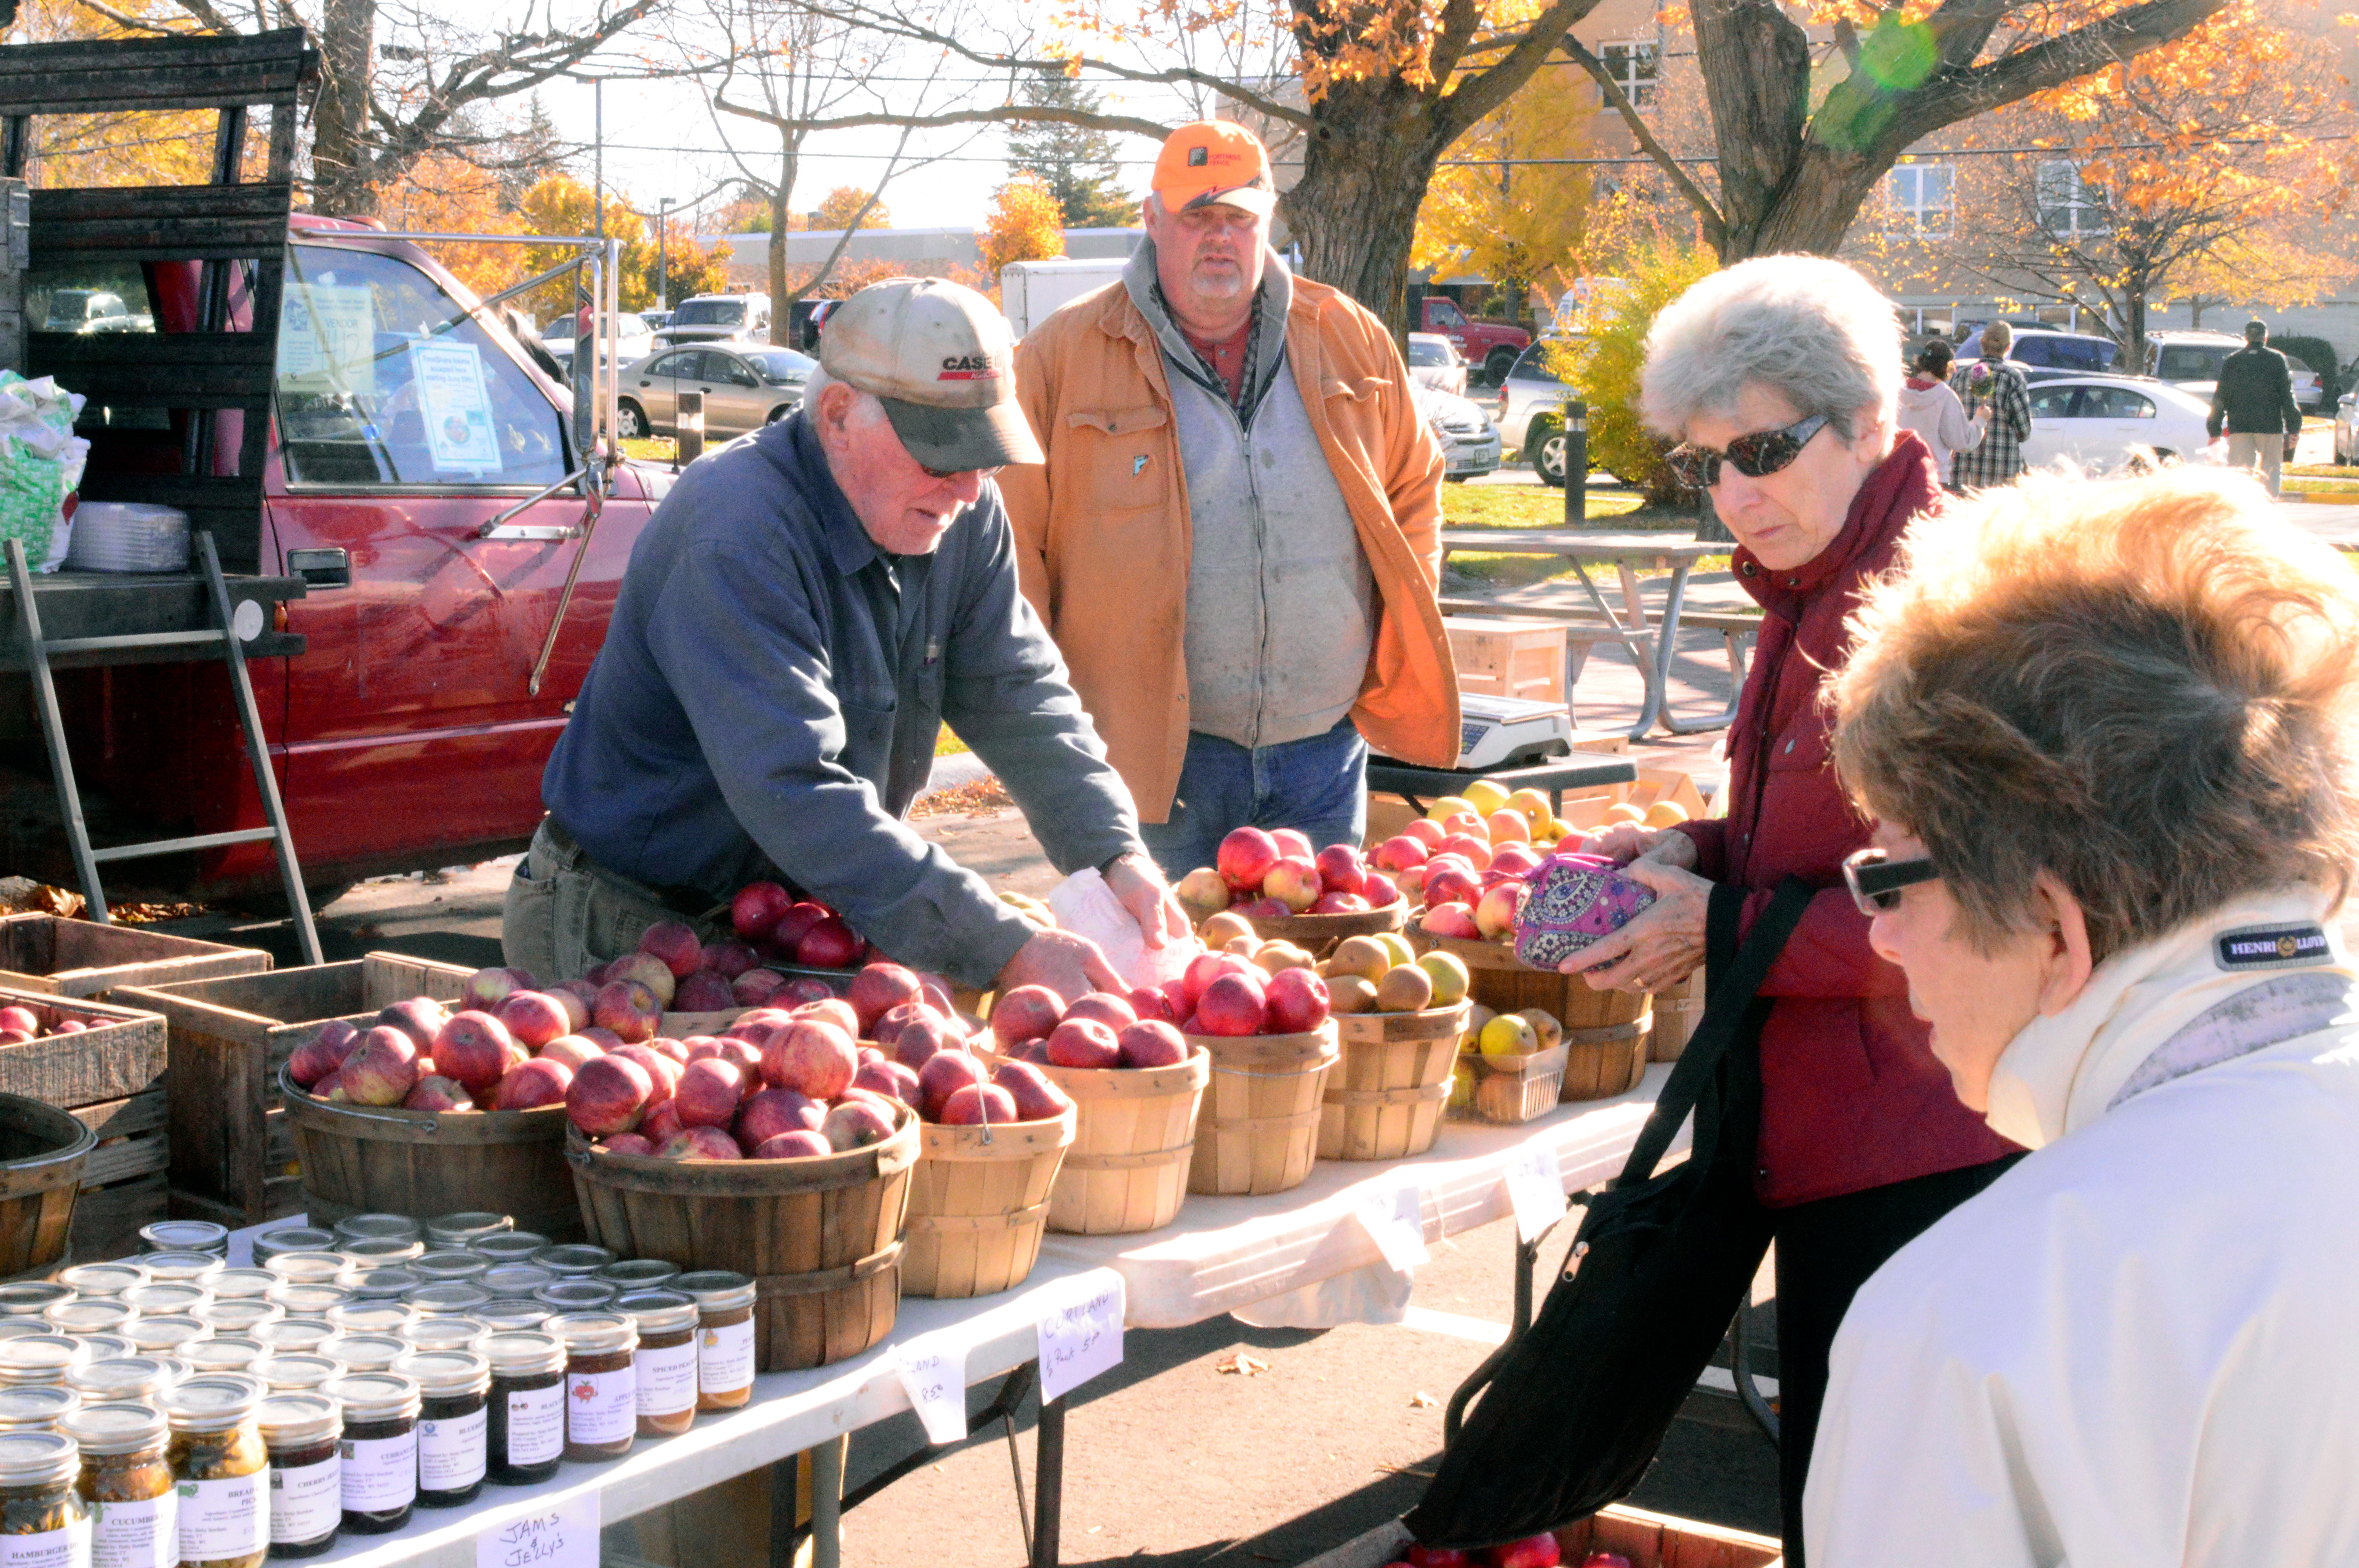 The farmers' markets last well into Fall.